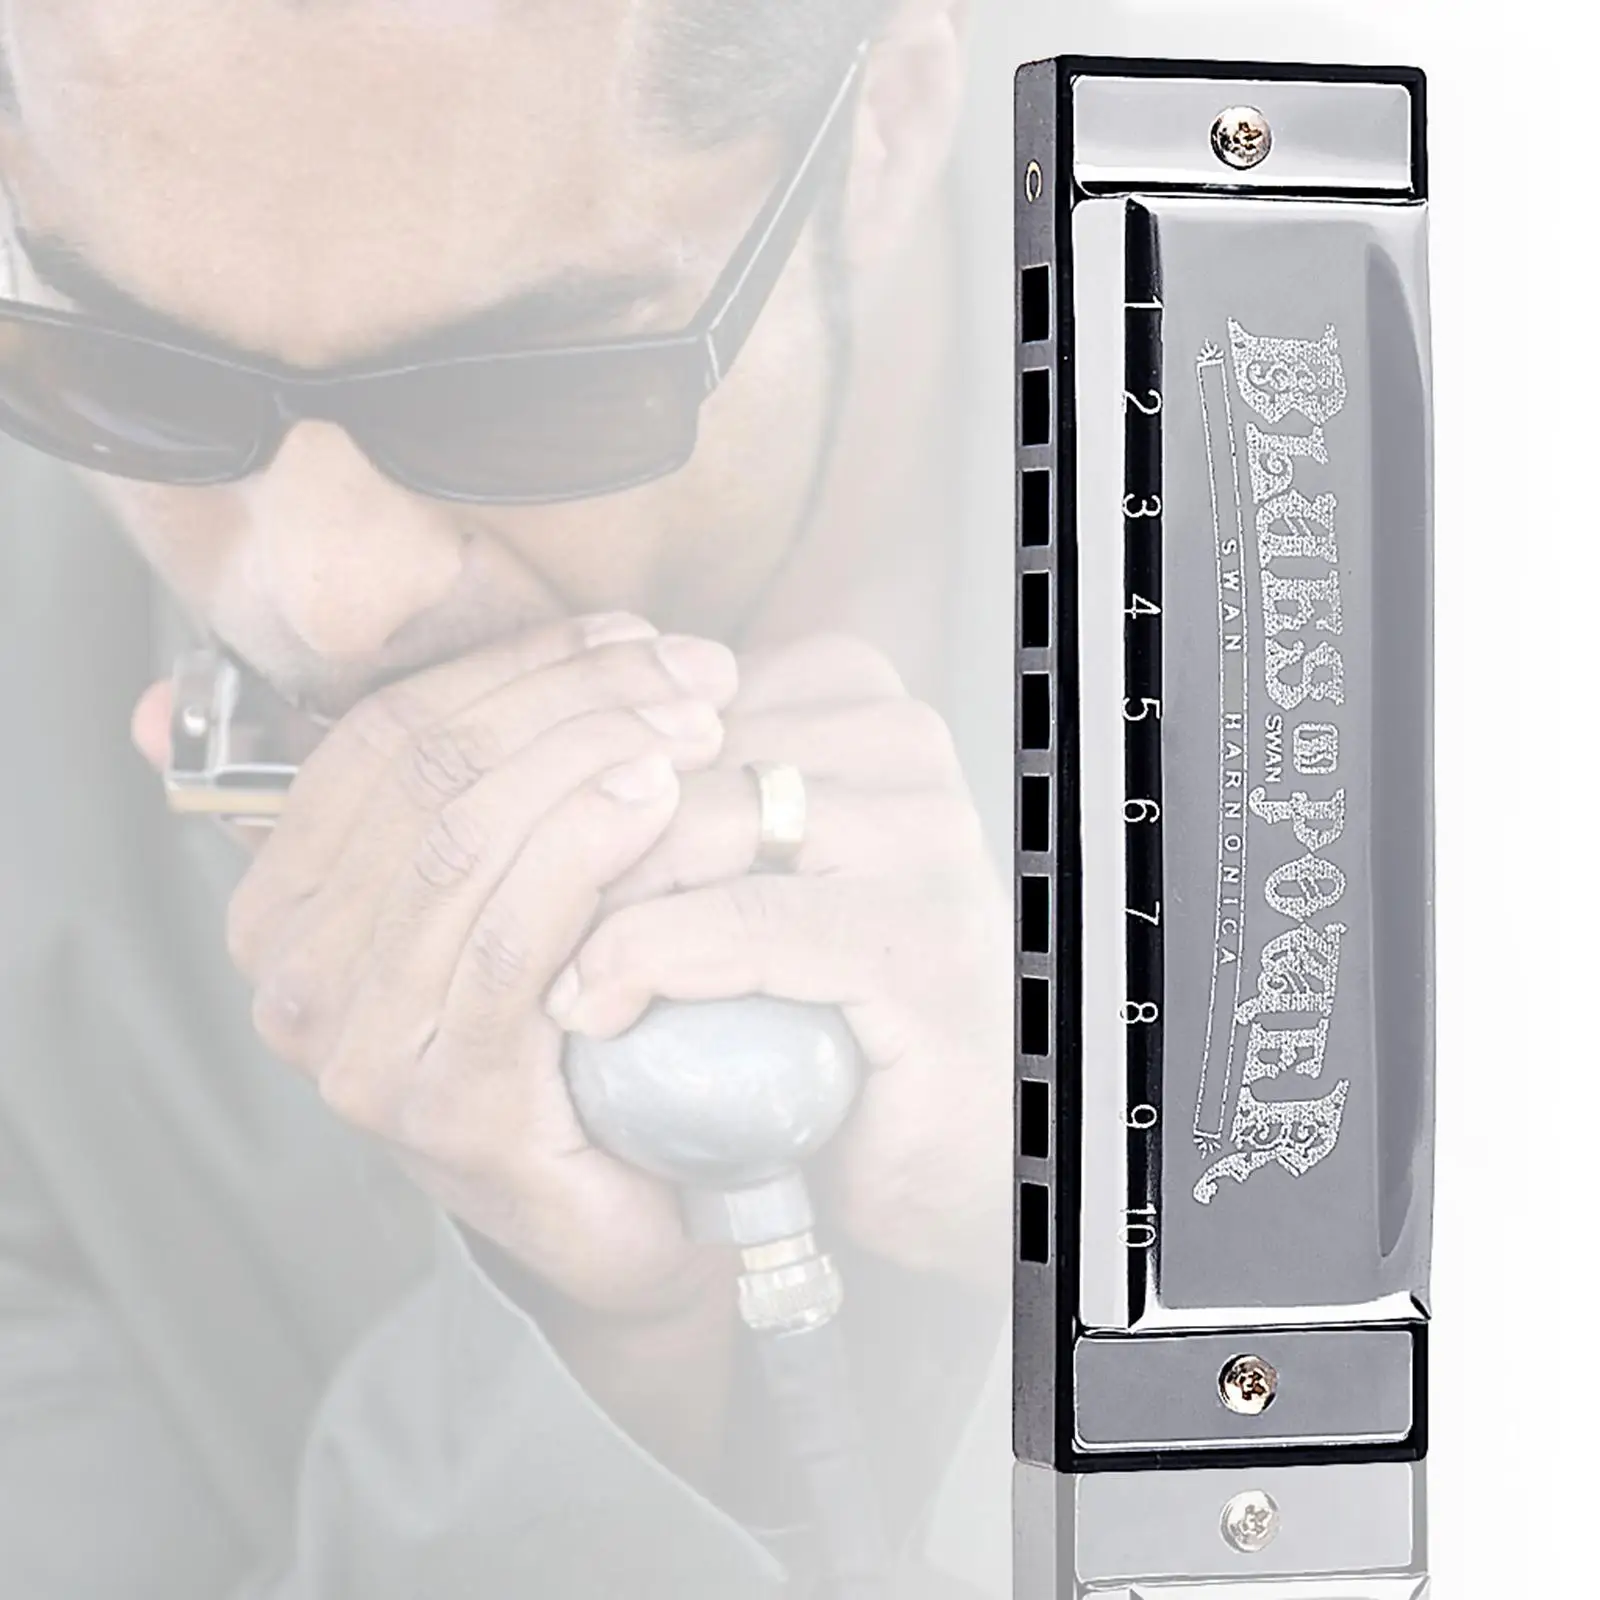 Portable Harmonica, Mouth Organ for Music Lovers Beginners Musicians Adults